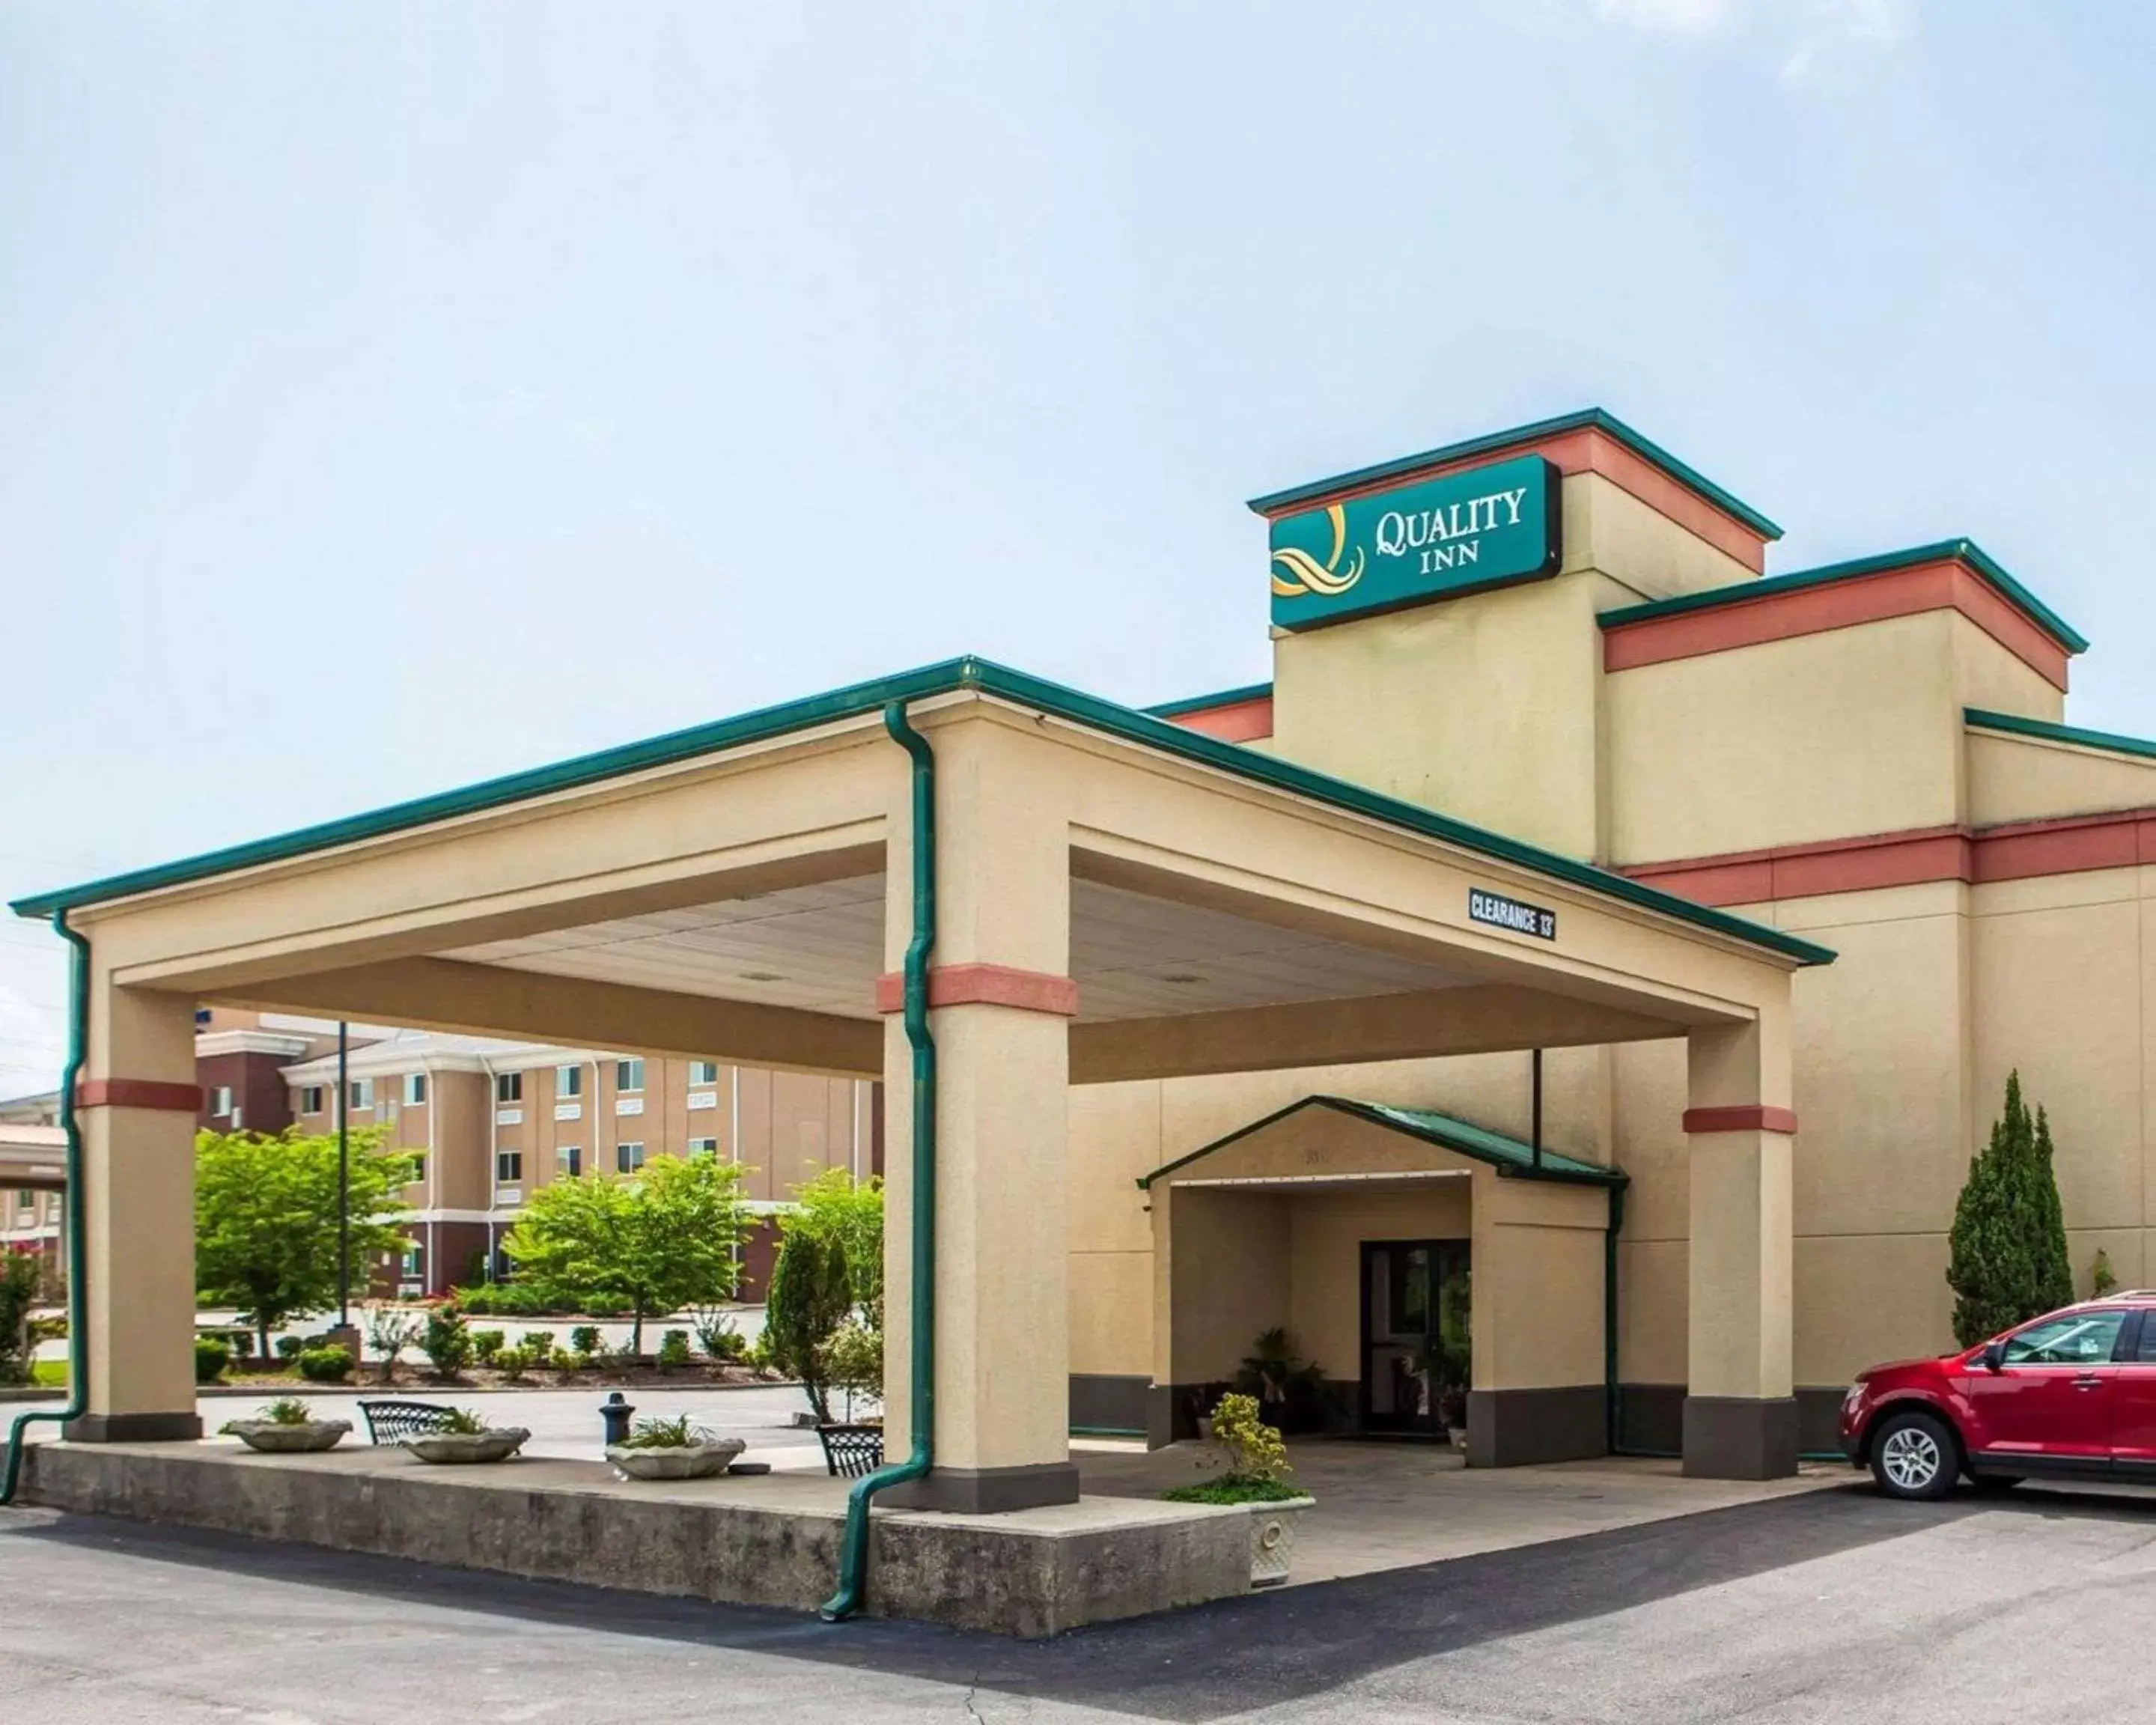 Property building in Quality Inn Florence Muscle Shoals